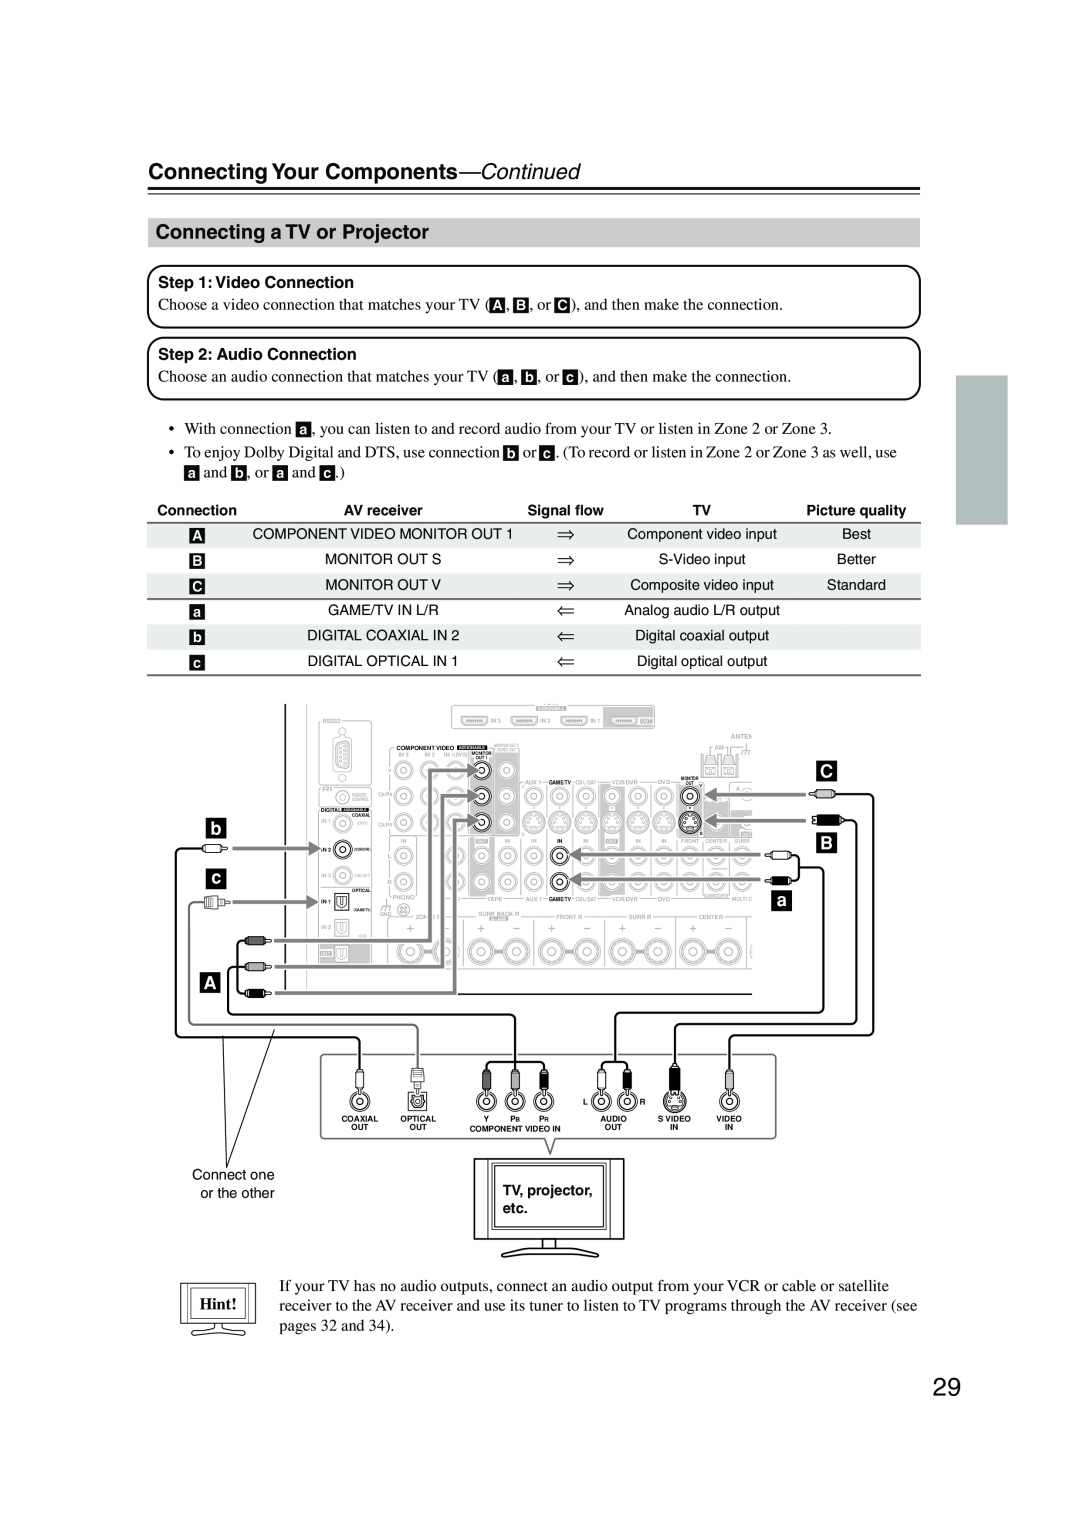 Integra DTR-7.8 instruction manual Connecting a TV or Projector, b c A, Hint, Connecting Your Components-Continued 